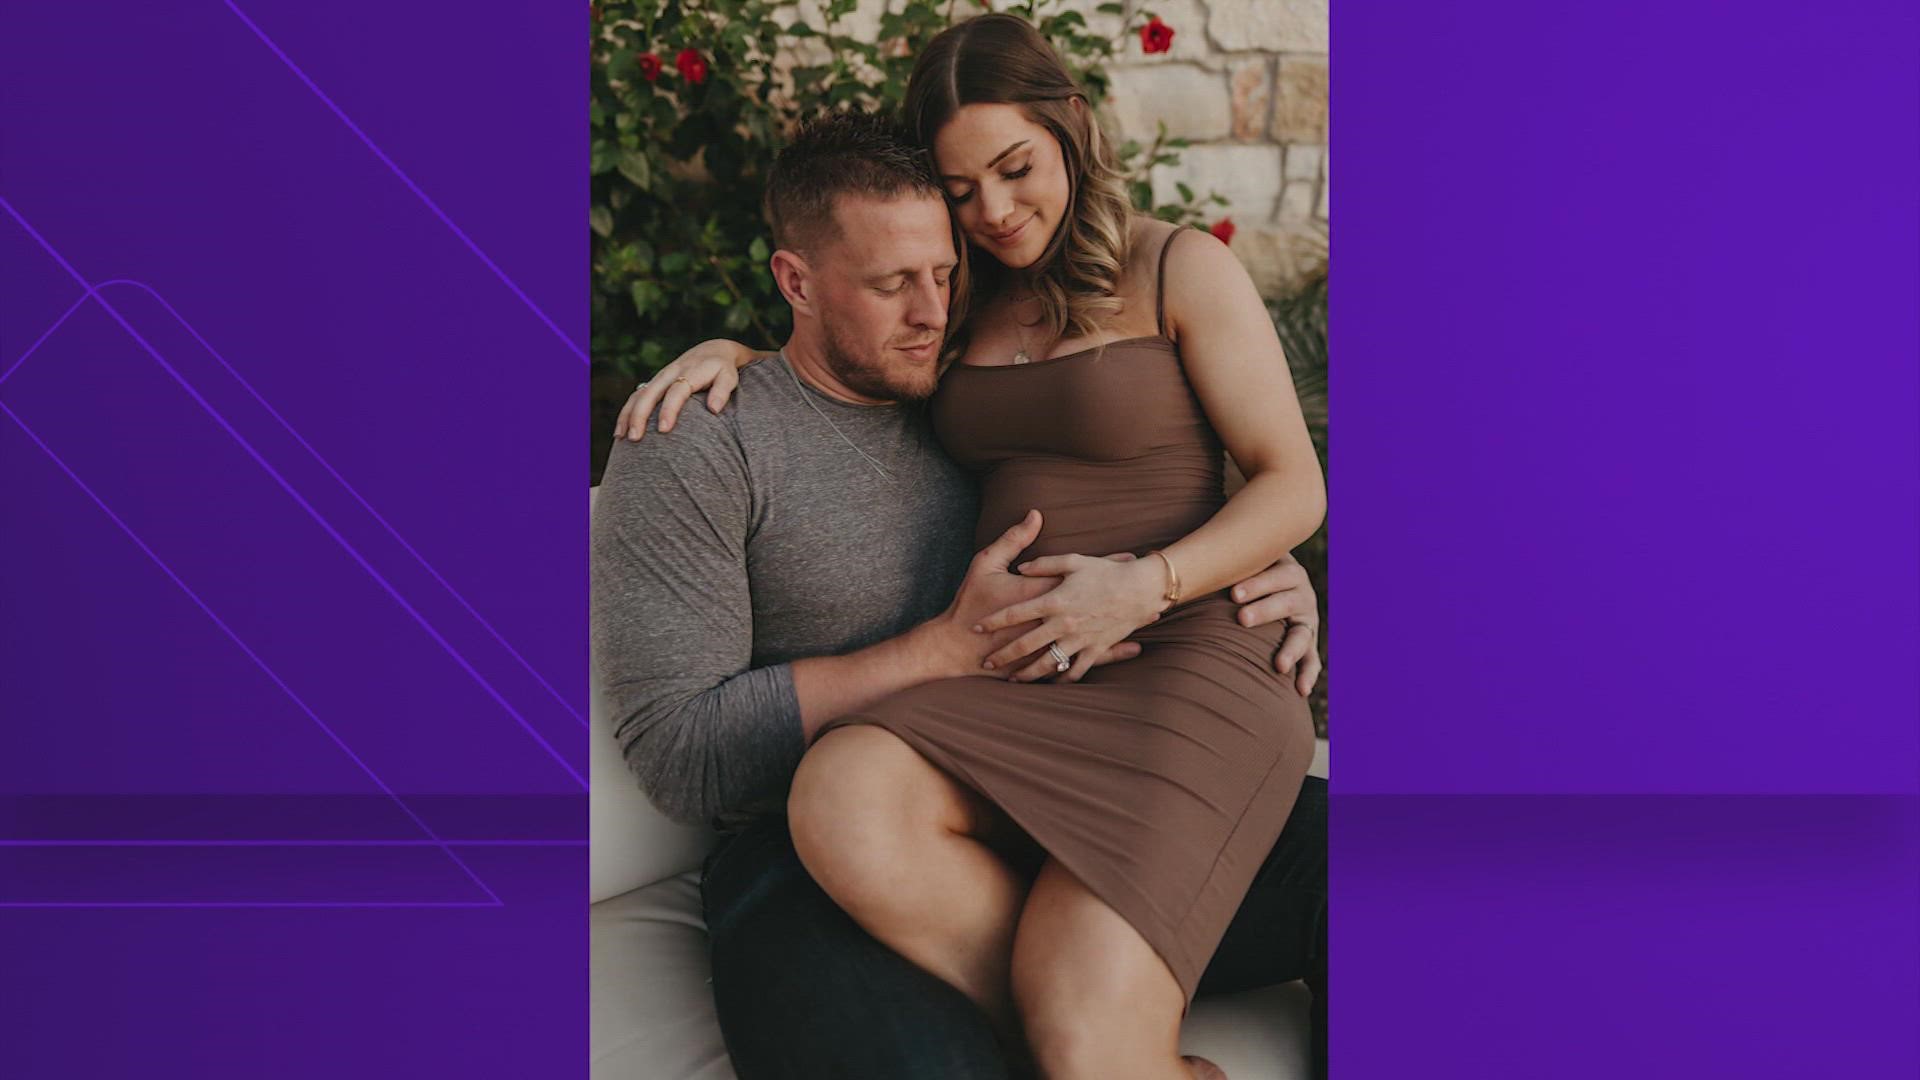 Congratulations are in order for JJ Watt and his wife Kealia Ohai who are expecting their first child together in October.